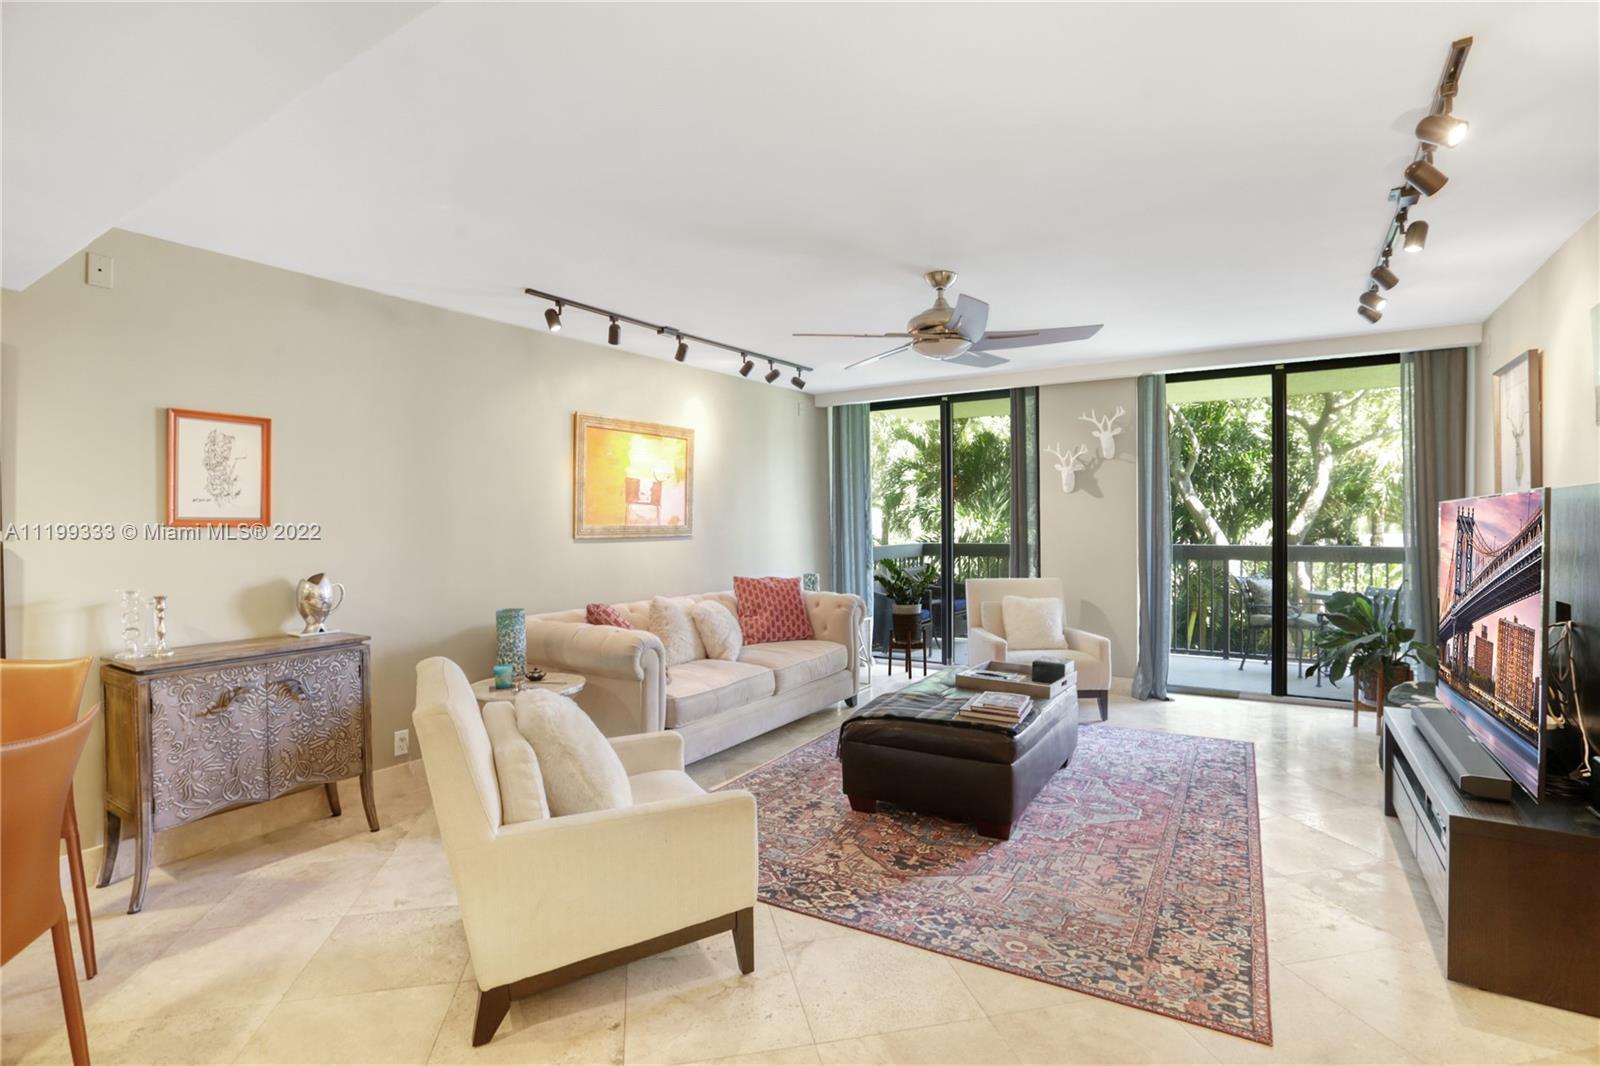 Tastefully renovated 1,440 condo at the Voyager with Intracoastal and garden views. This unit featur